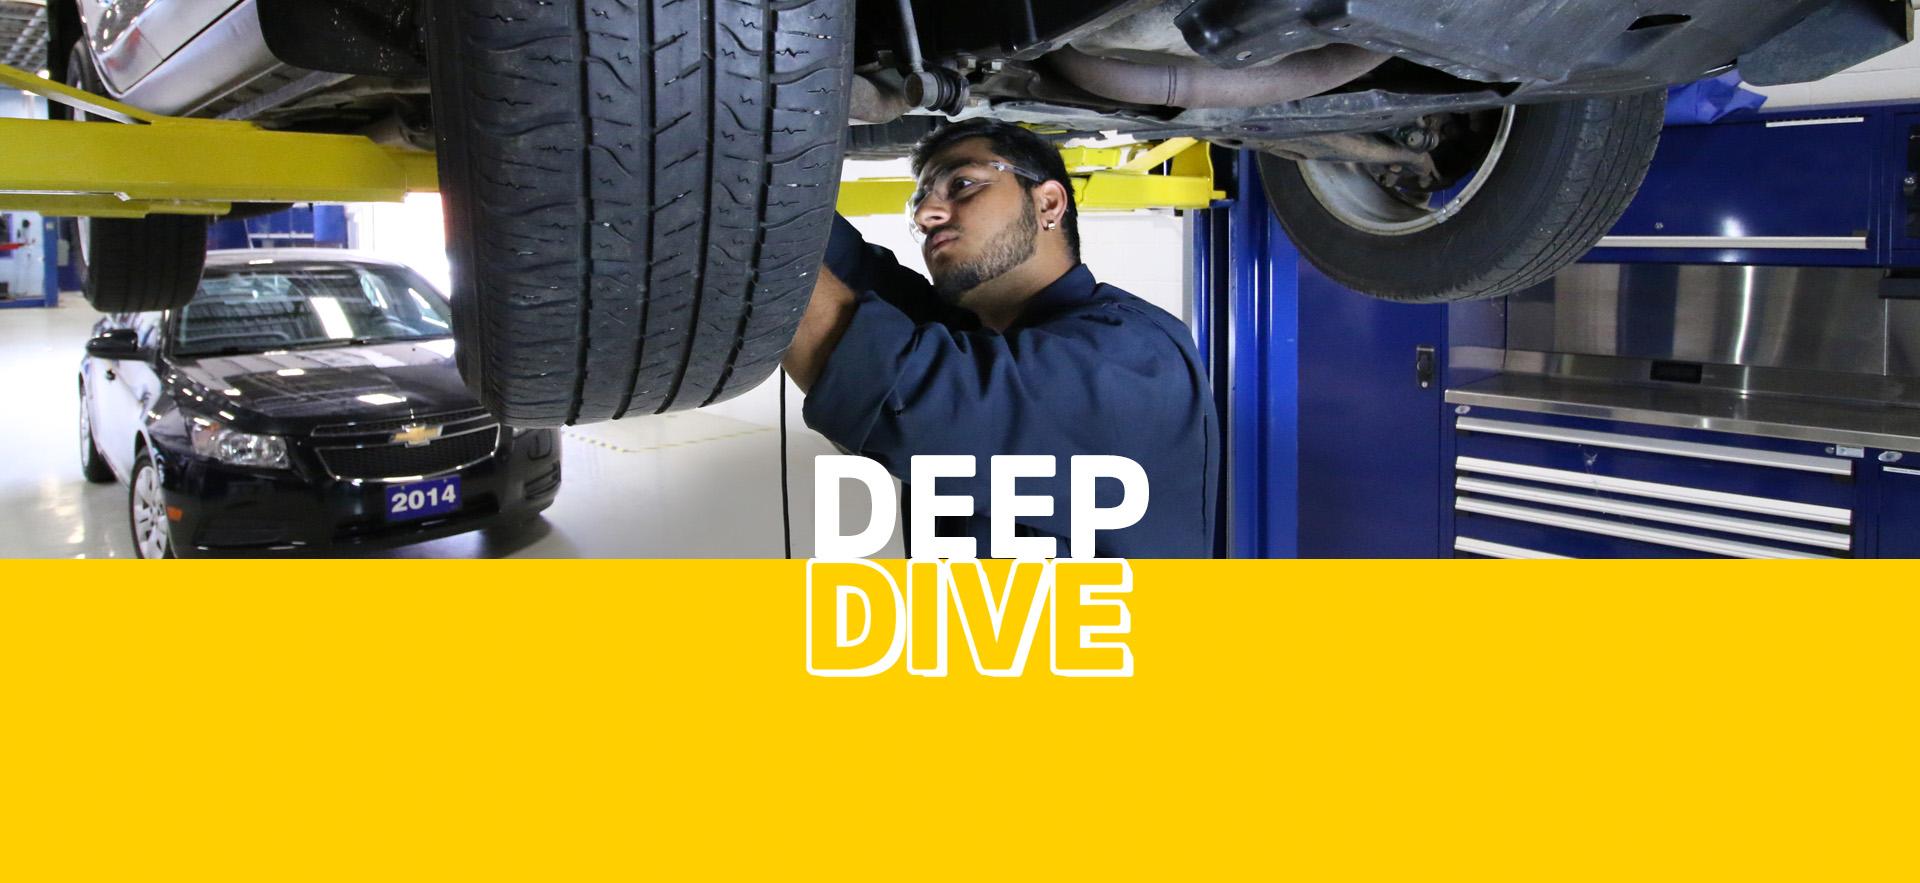 Deep Dive Skilled Trades student working under vehicle in automotive program